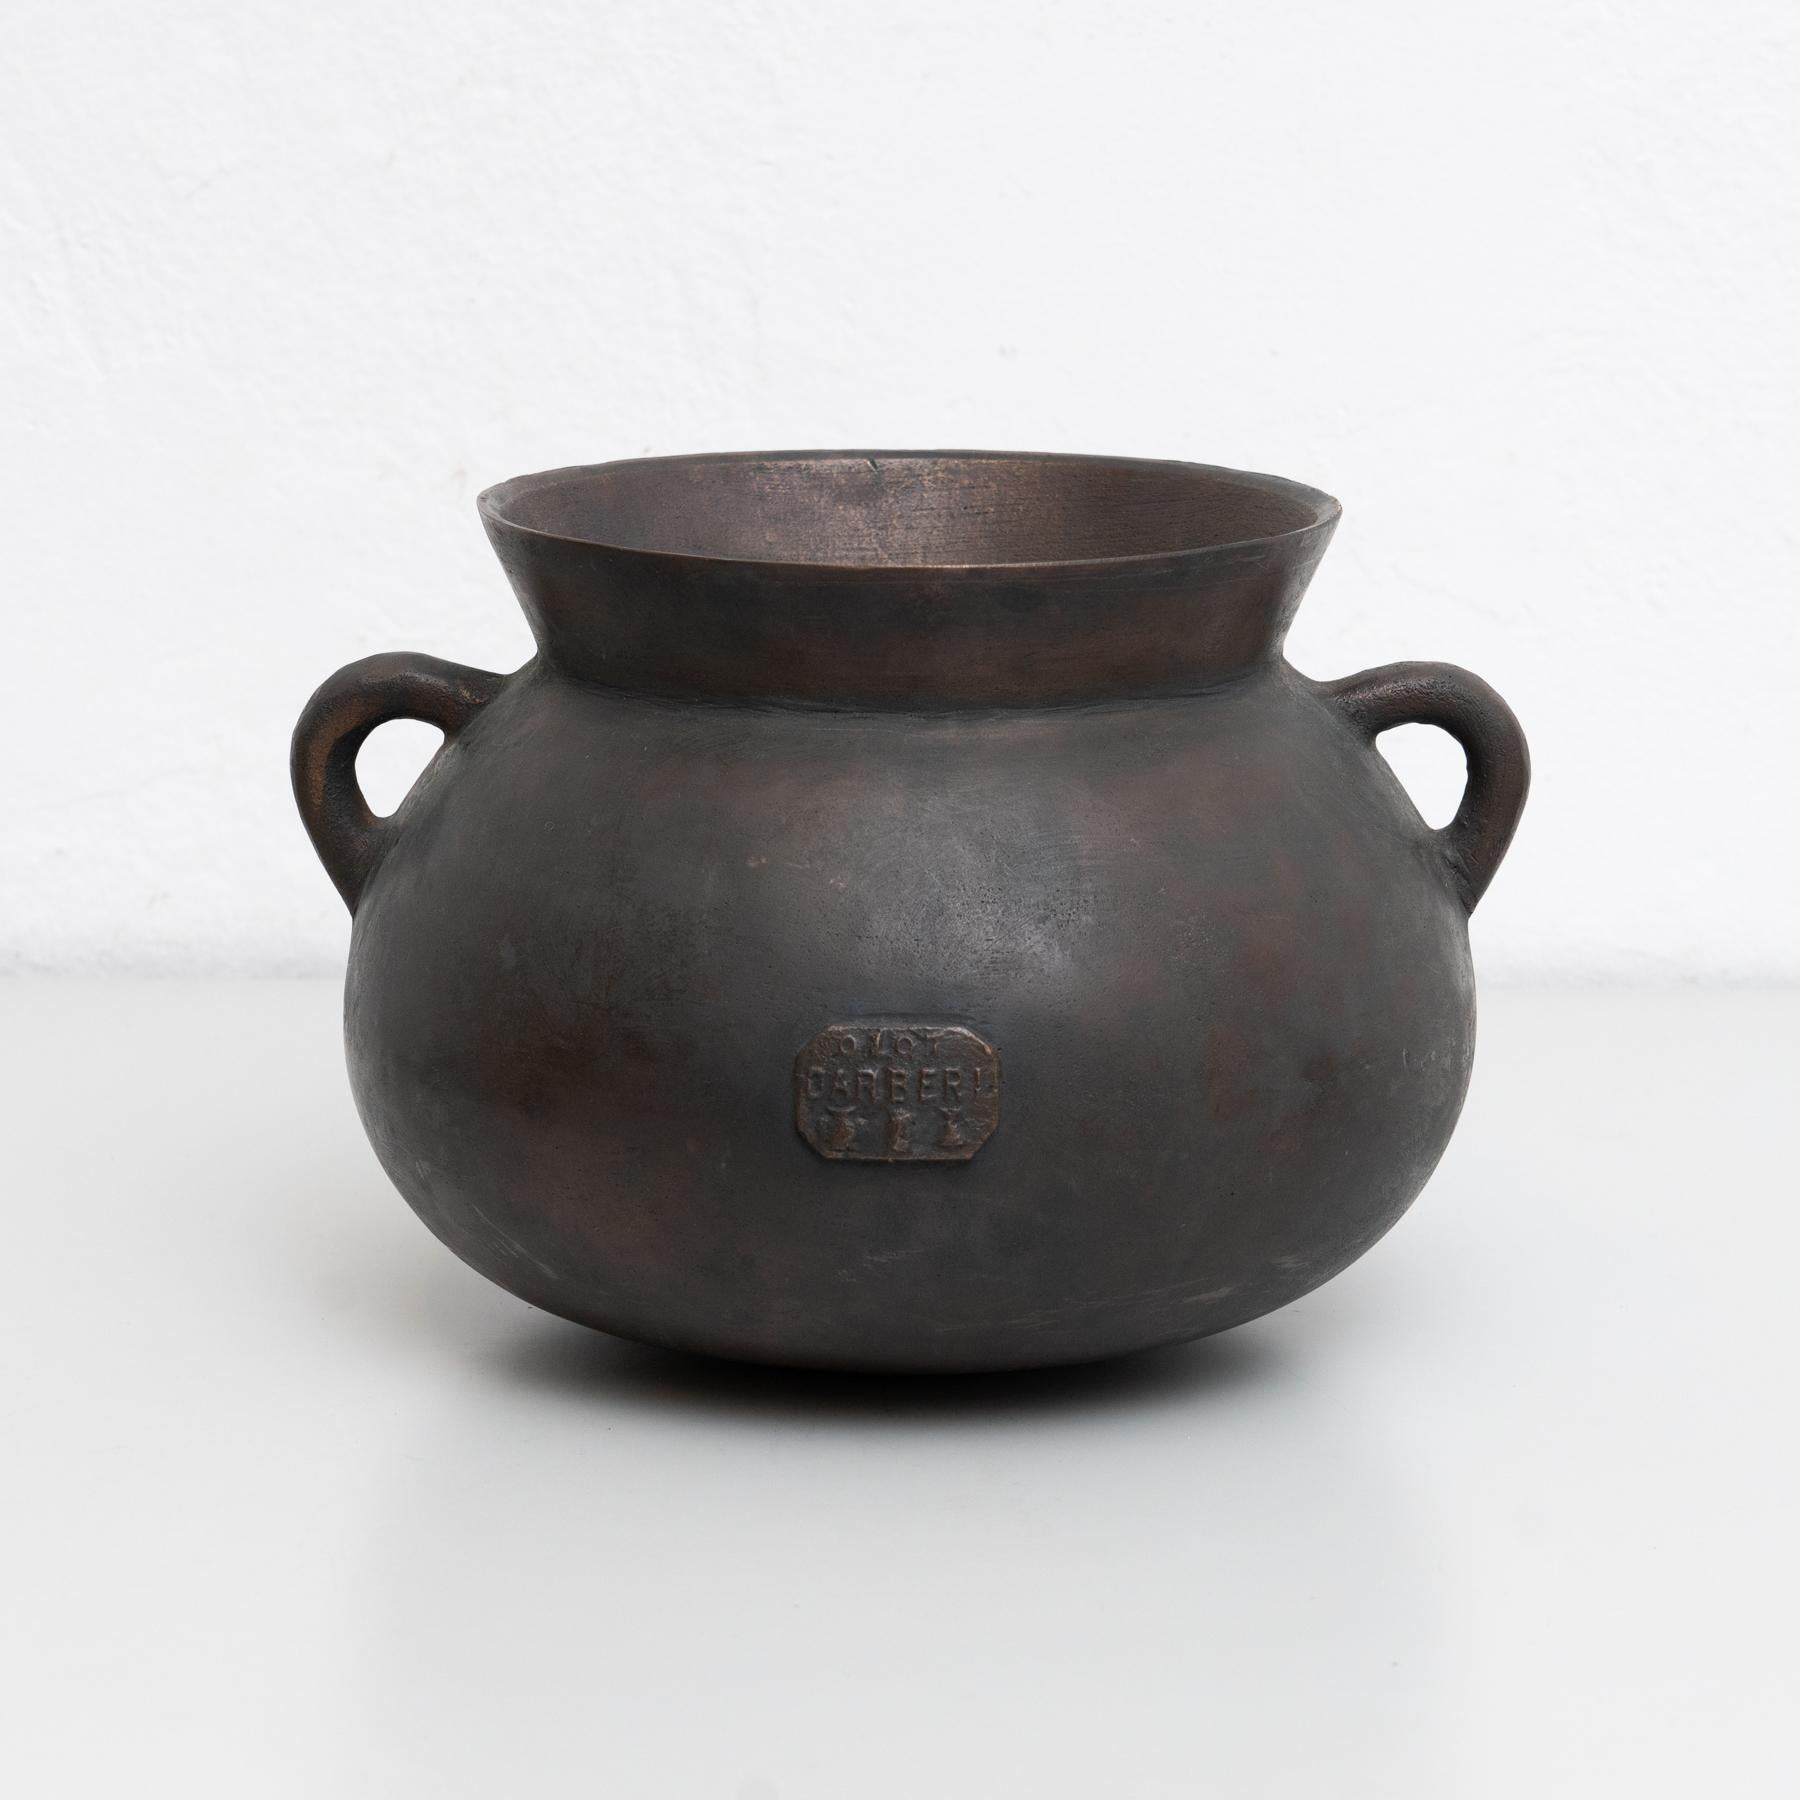 Vintage bronze pot. 

Signed.

By Barberí foundry in Olot, Spain circa 1950.

In original condition, with minor wear consistent with age and use, preserving a beautiful patina.

Materials:
Bronze.